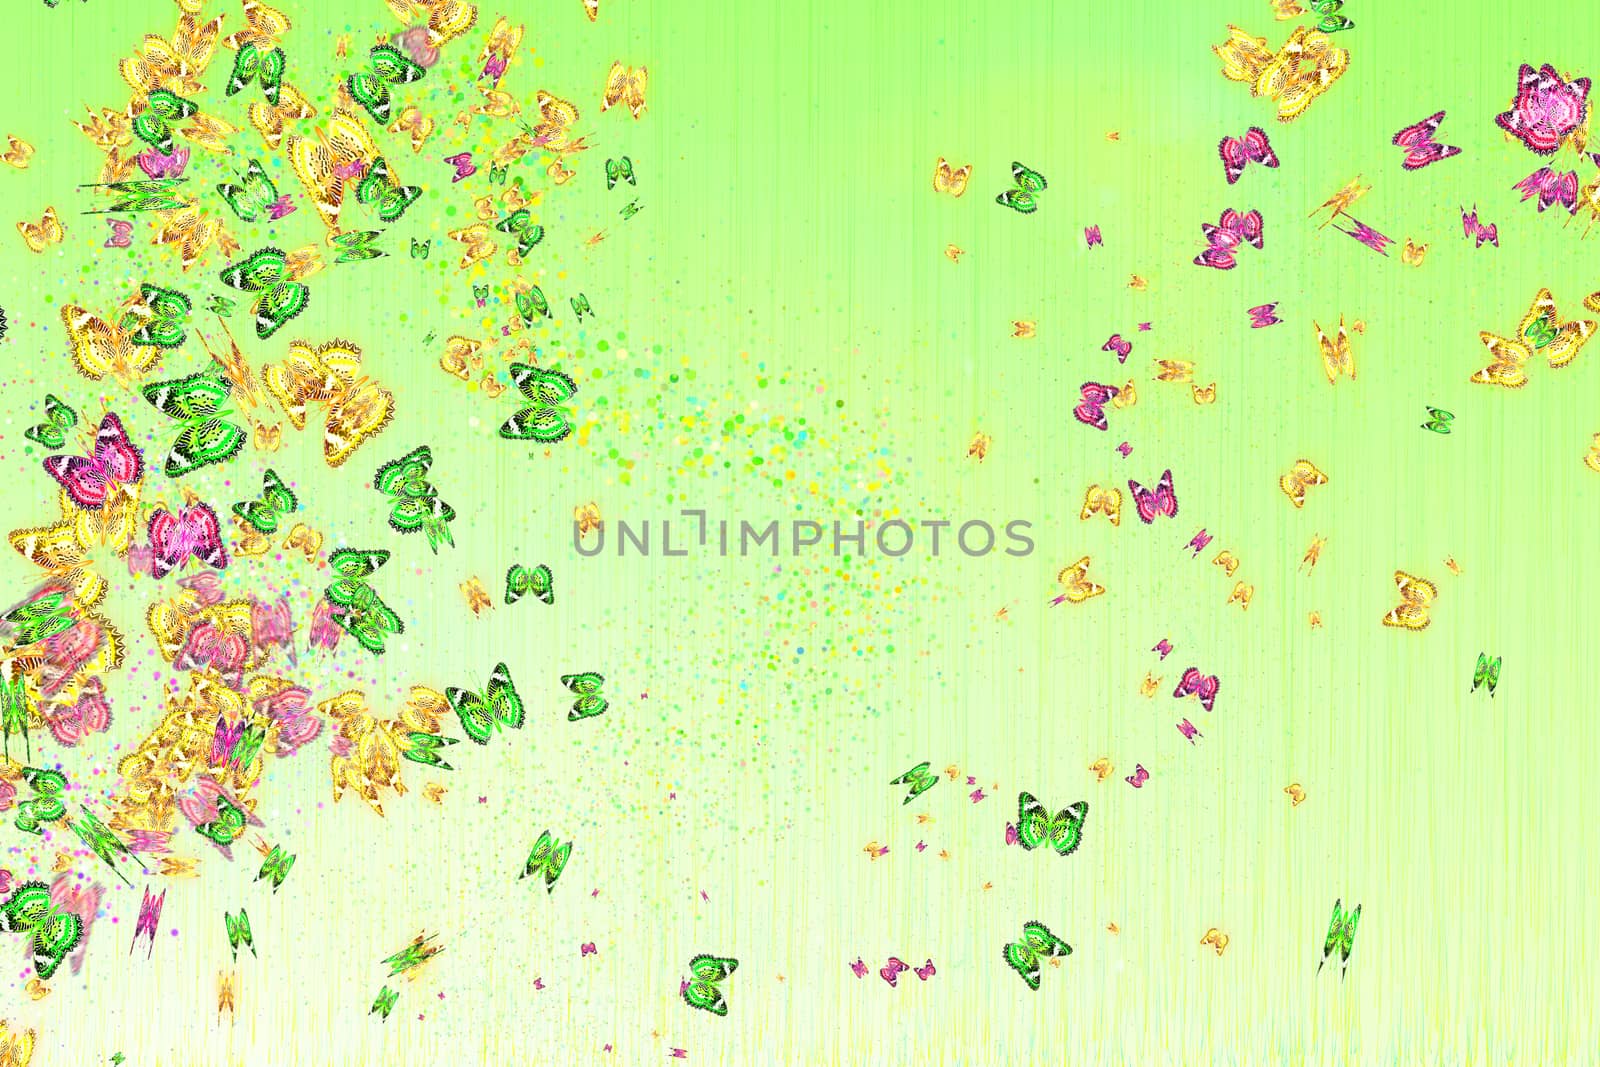 Green, yellow and pink butterflies on a light green background